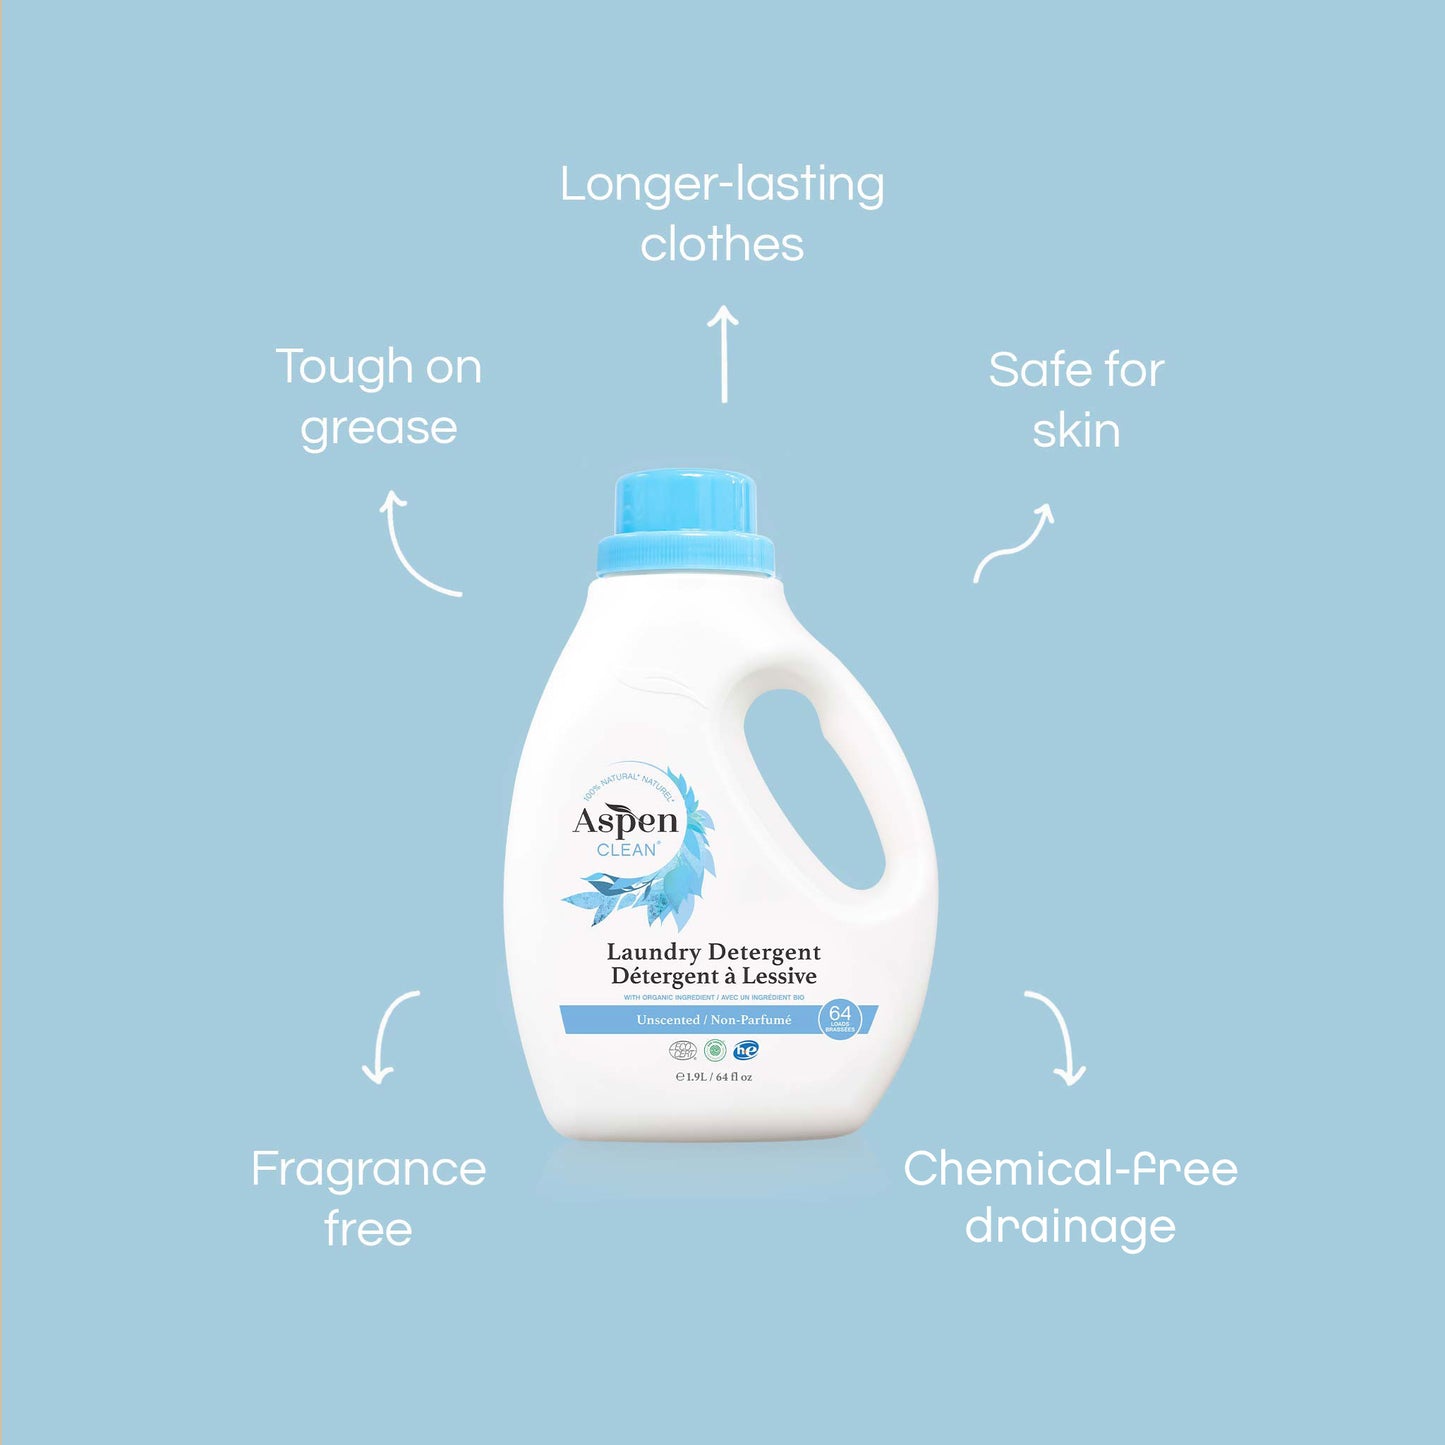 Natural Laundry Detergent Unscented features